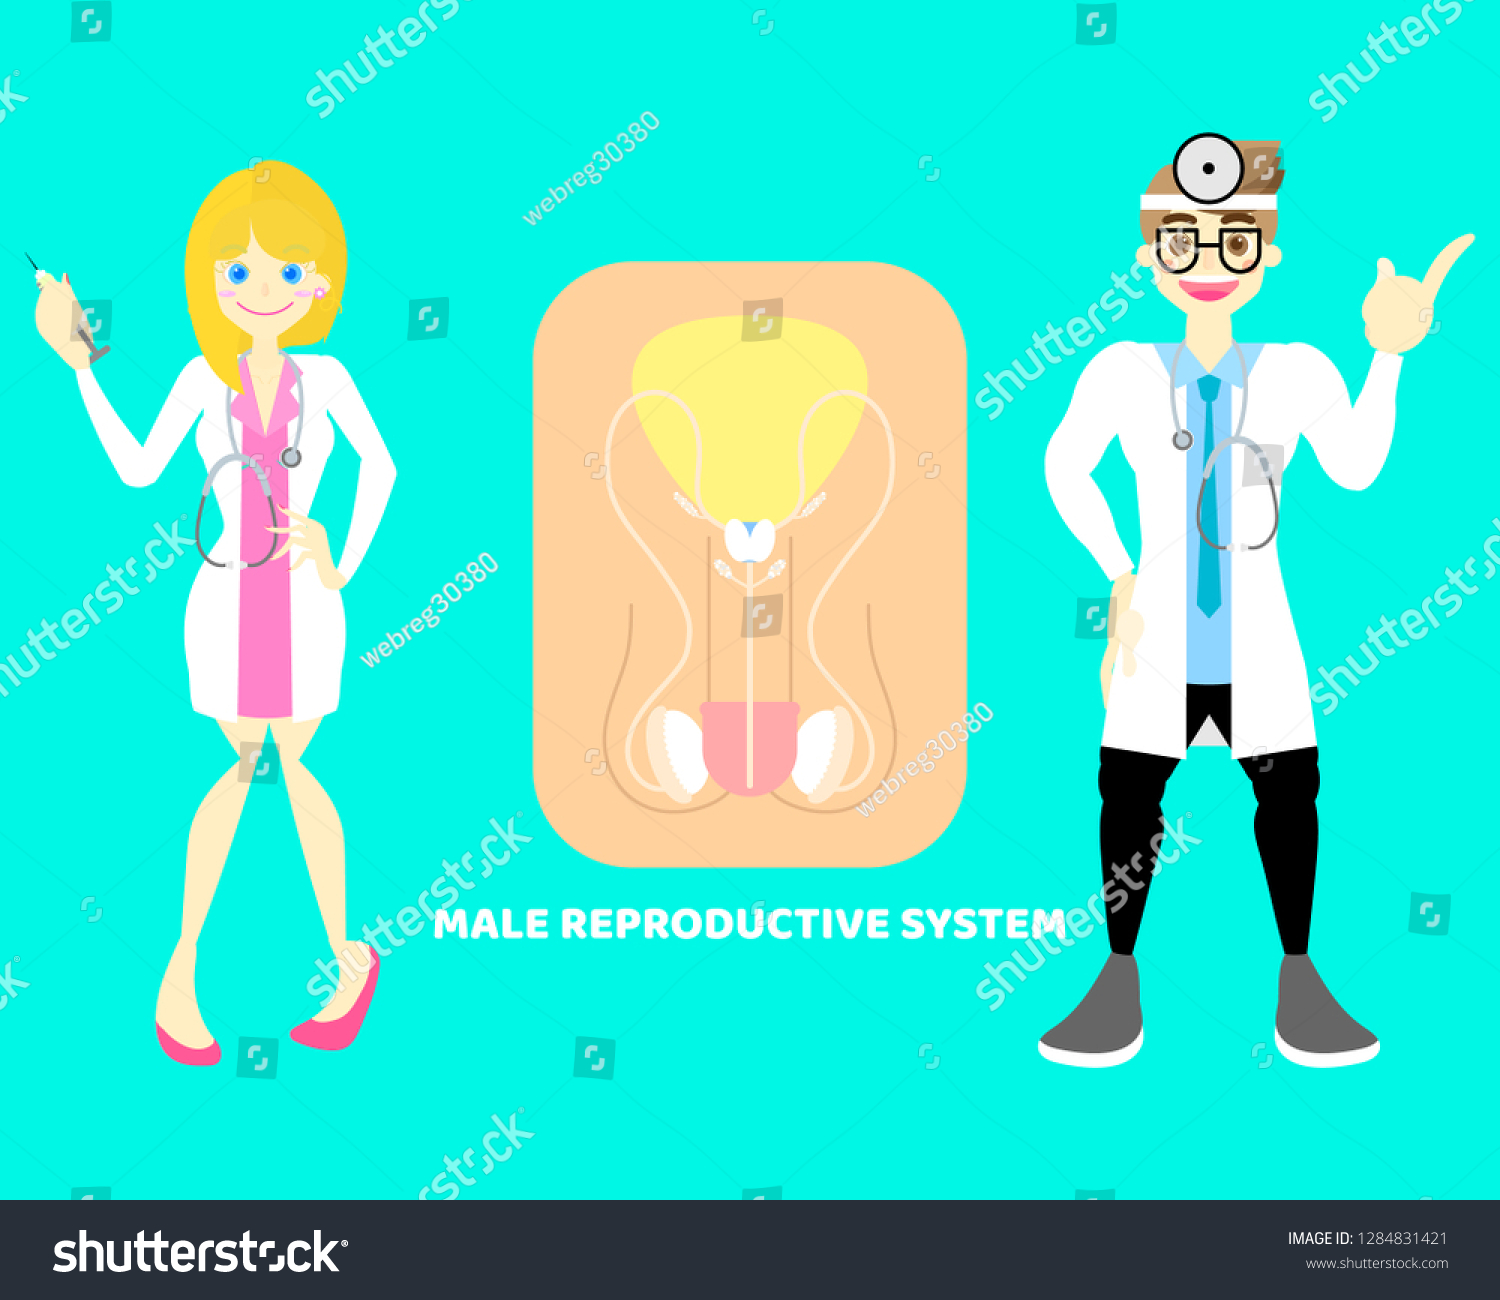 Male Female Doctor Male Reproductive System Stock Vector Royalty Free 1284831421 Shutterstock 2283